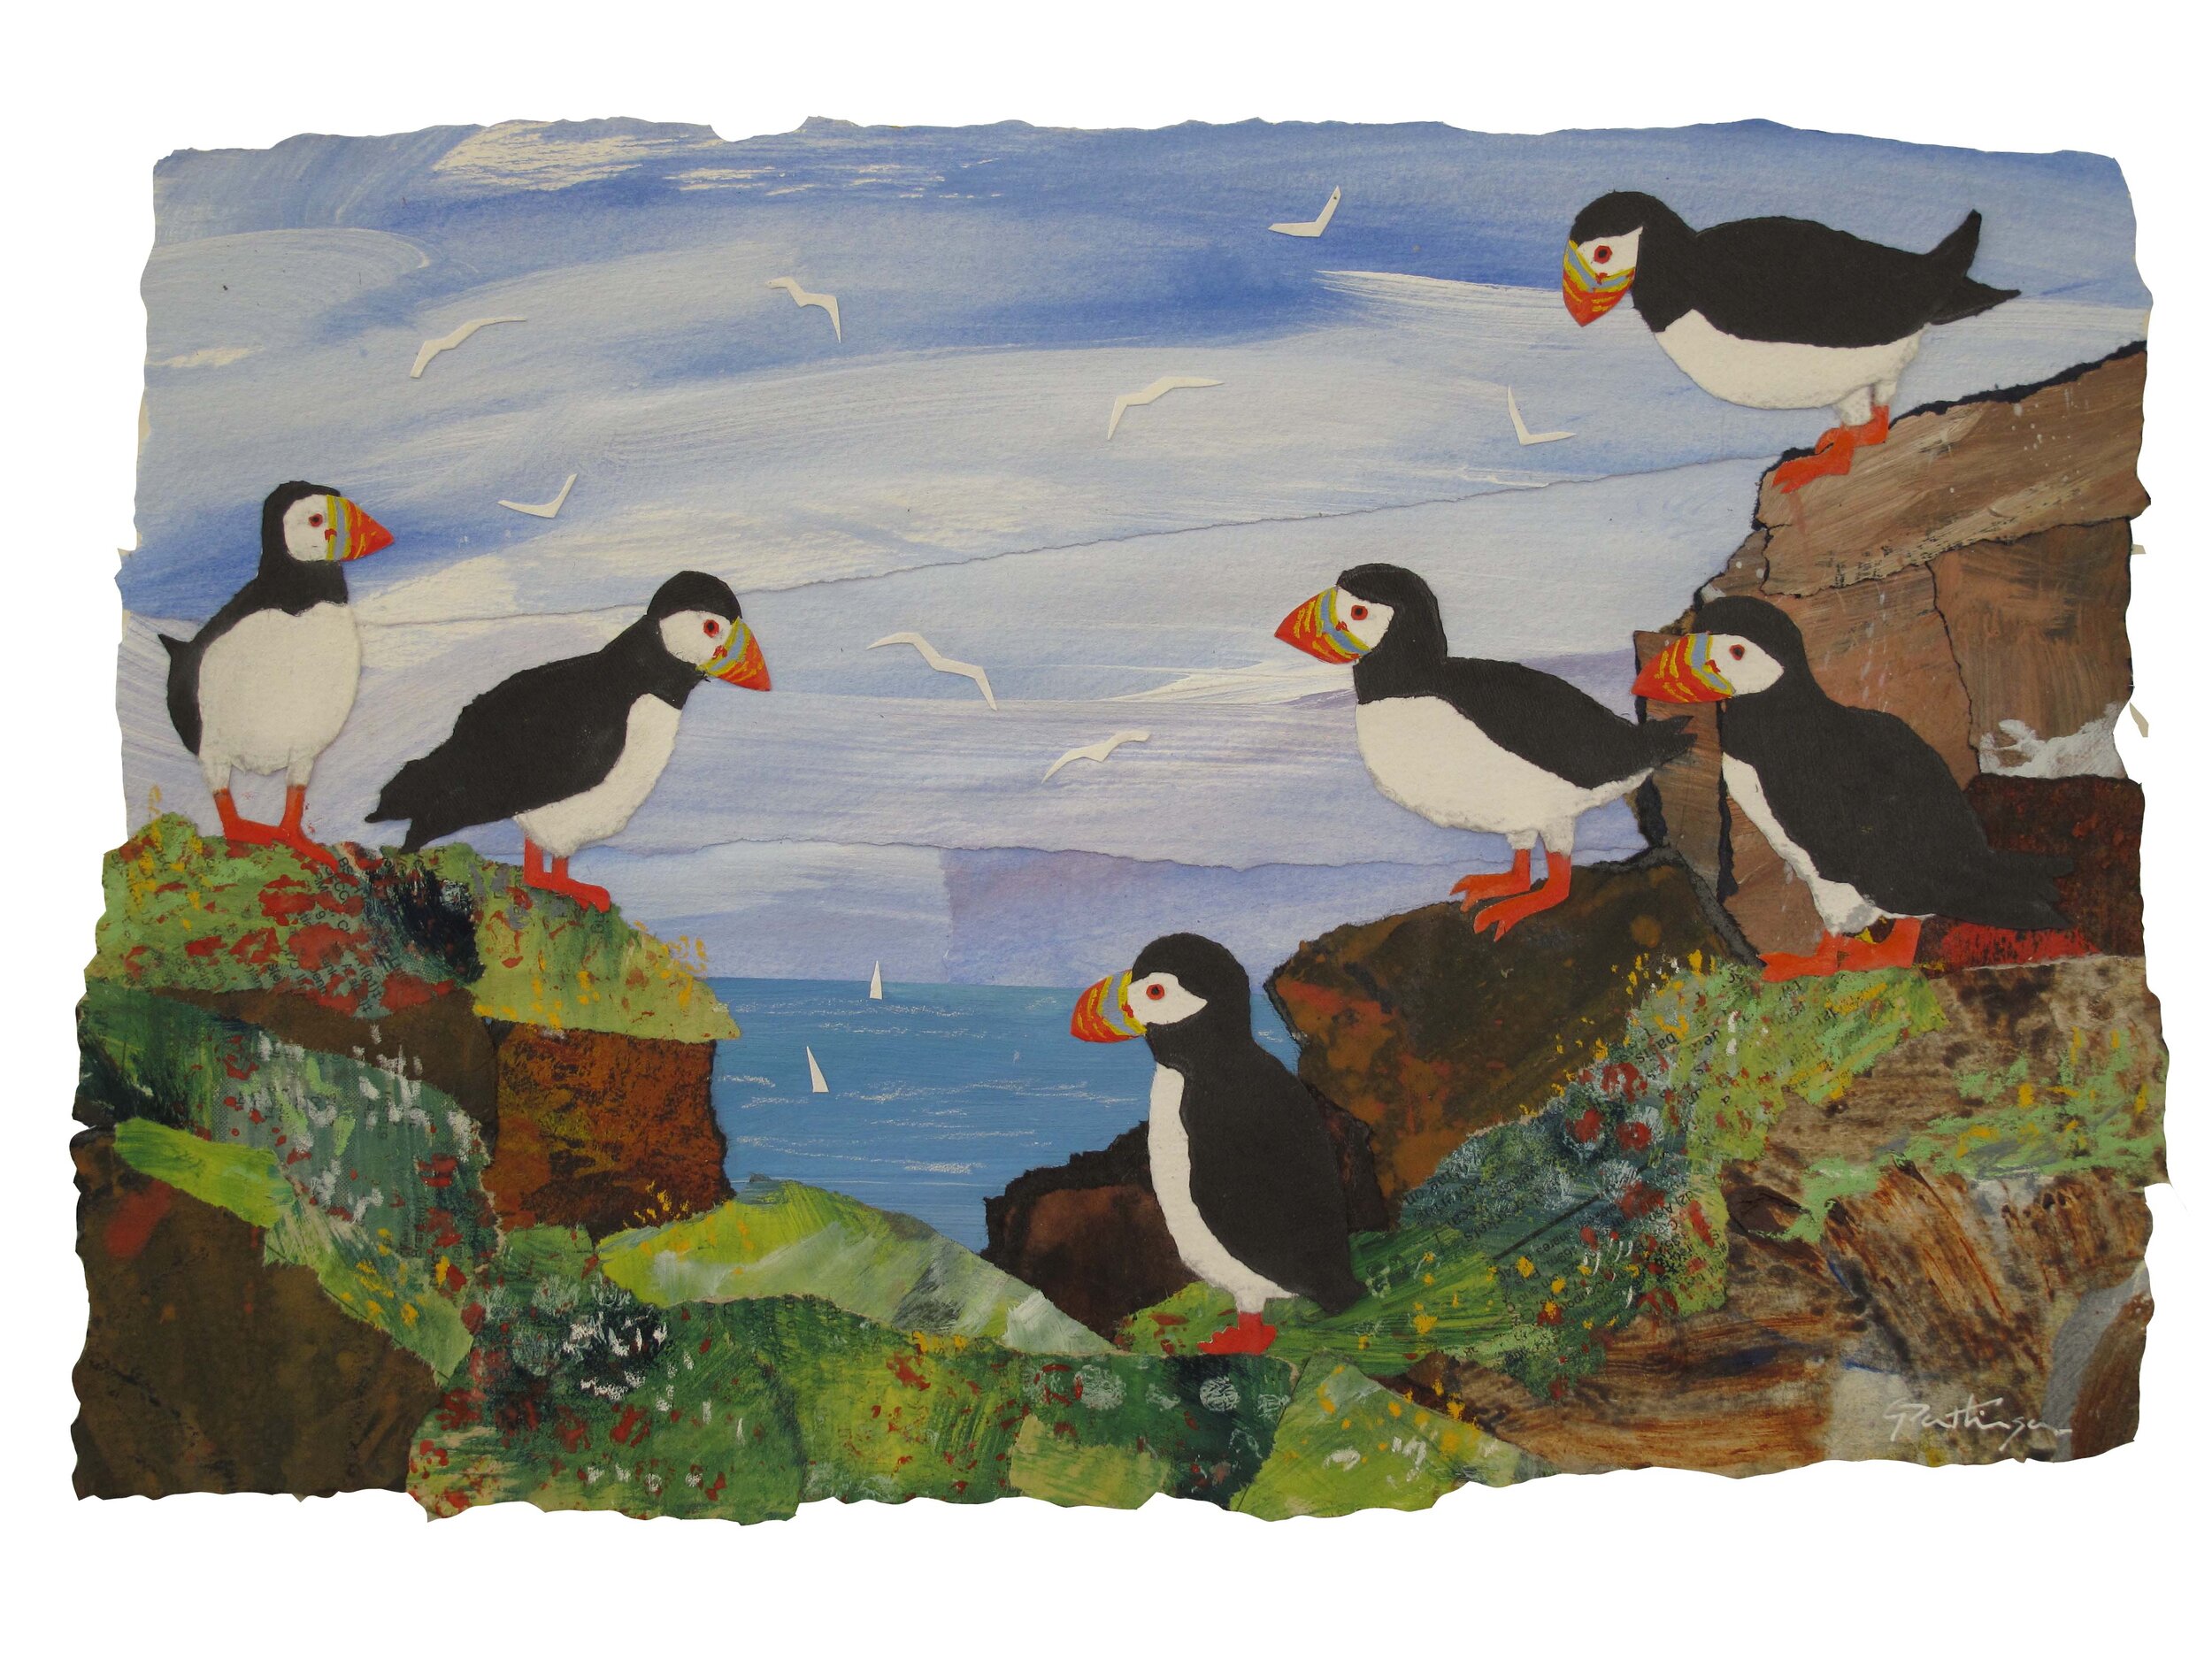 2b Puffins -1 of 6 place mat and coaster designs for birds of land and sea.jpg